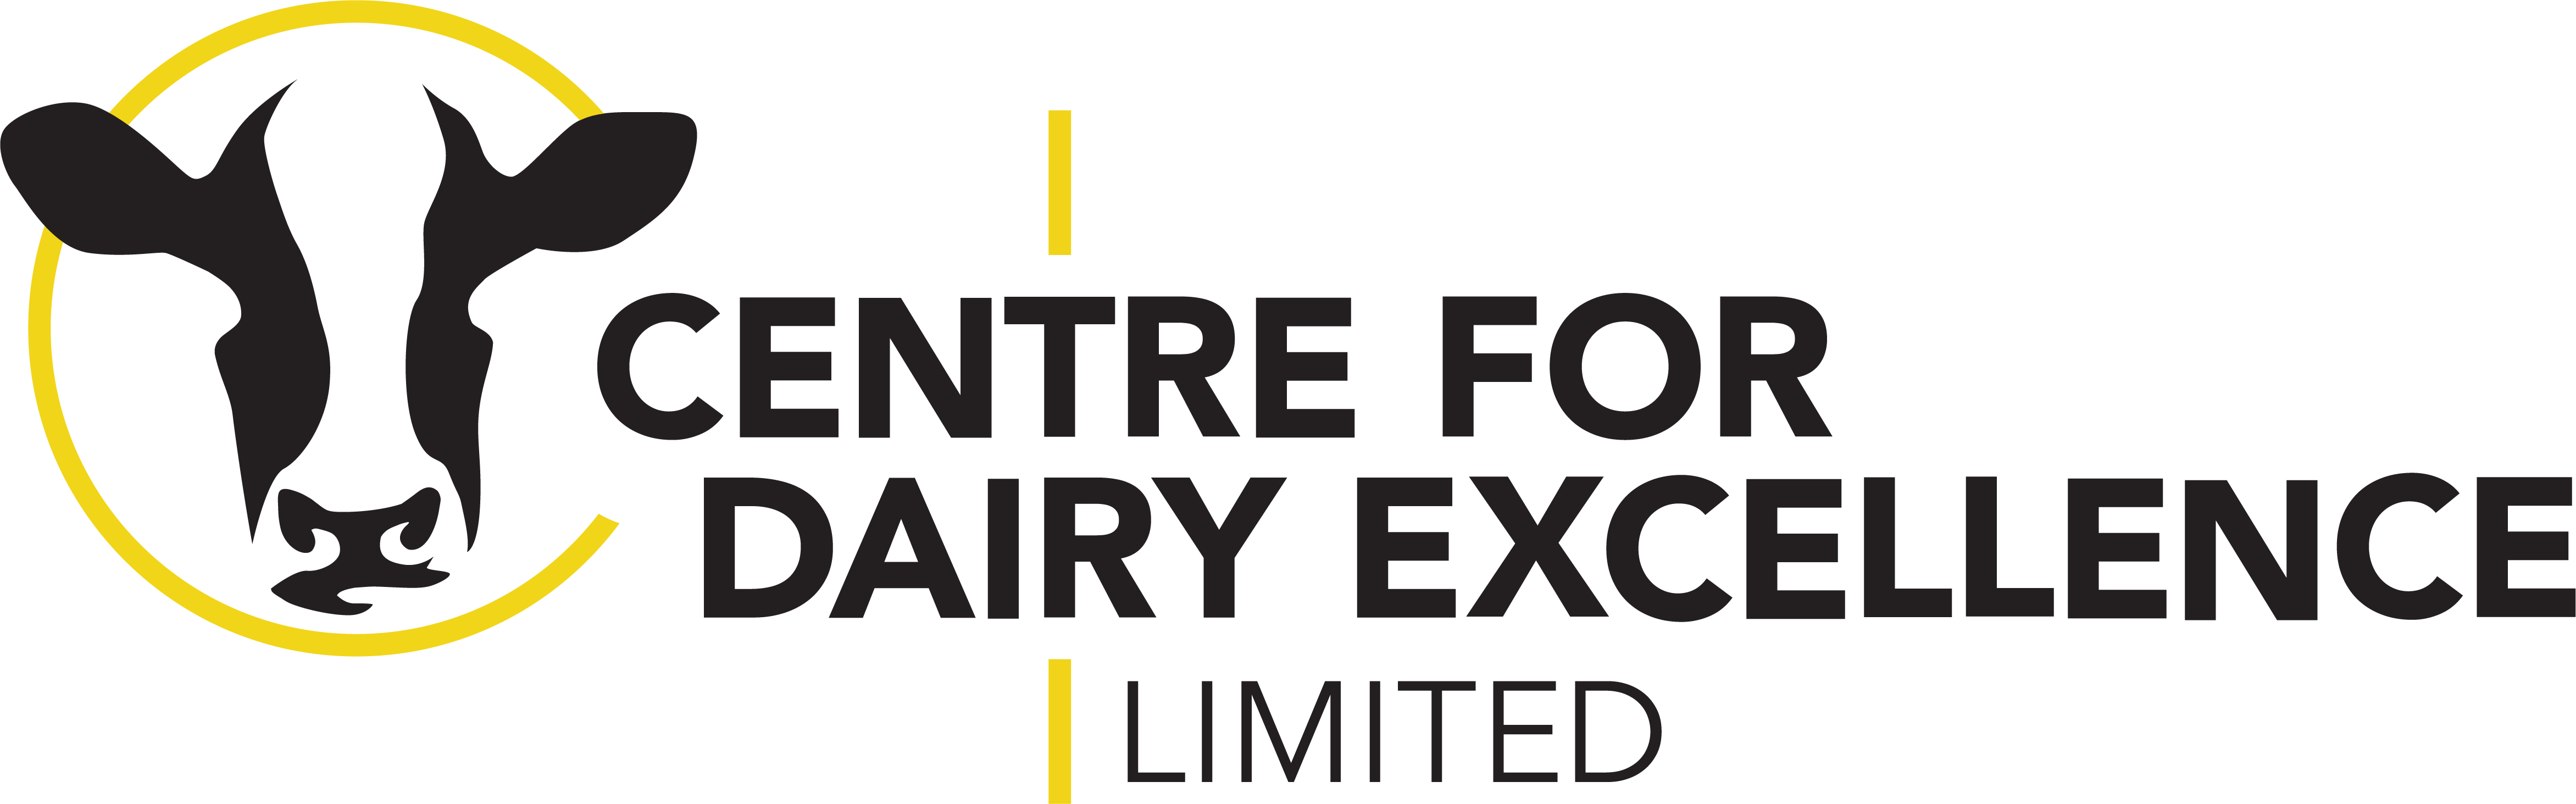 Centre for Dairy Excellence